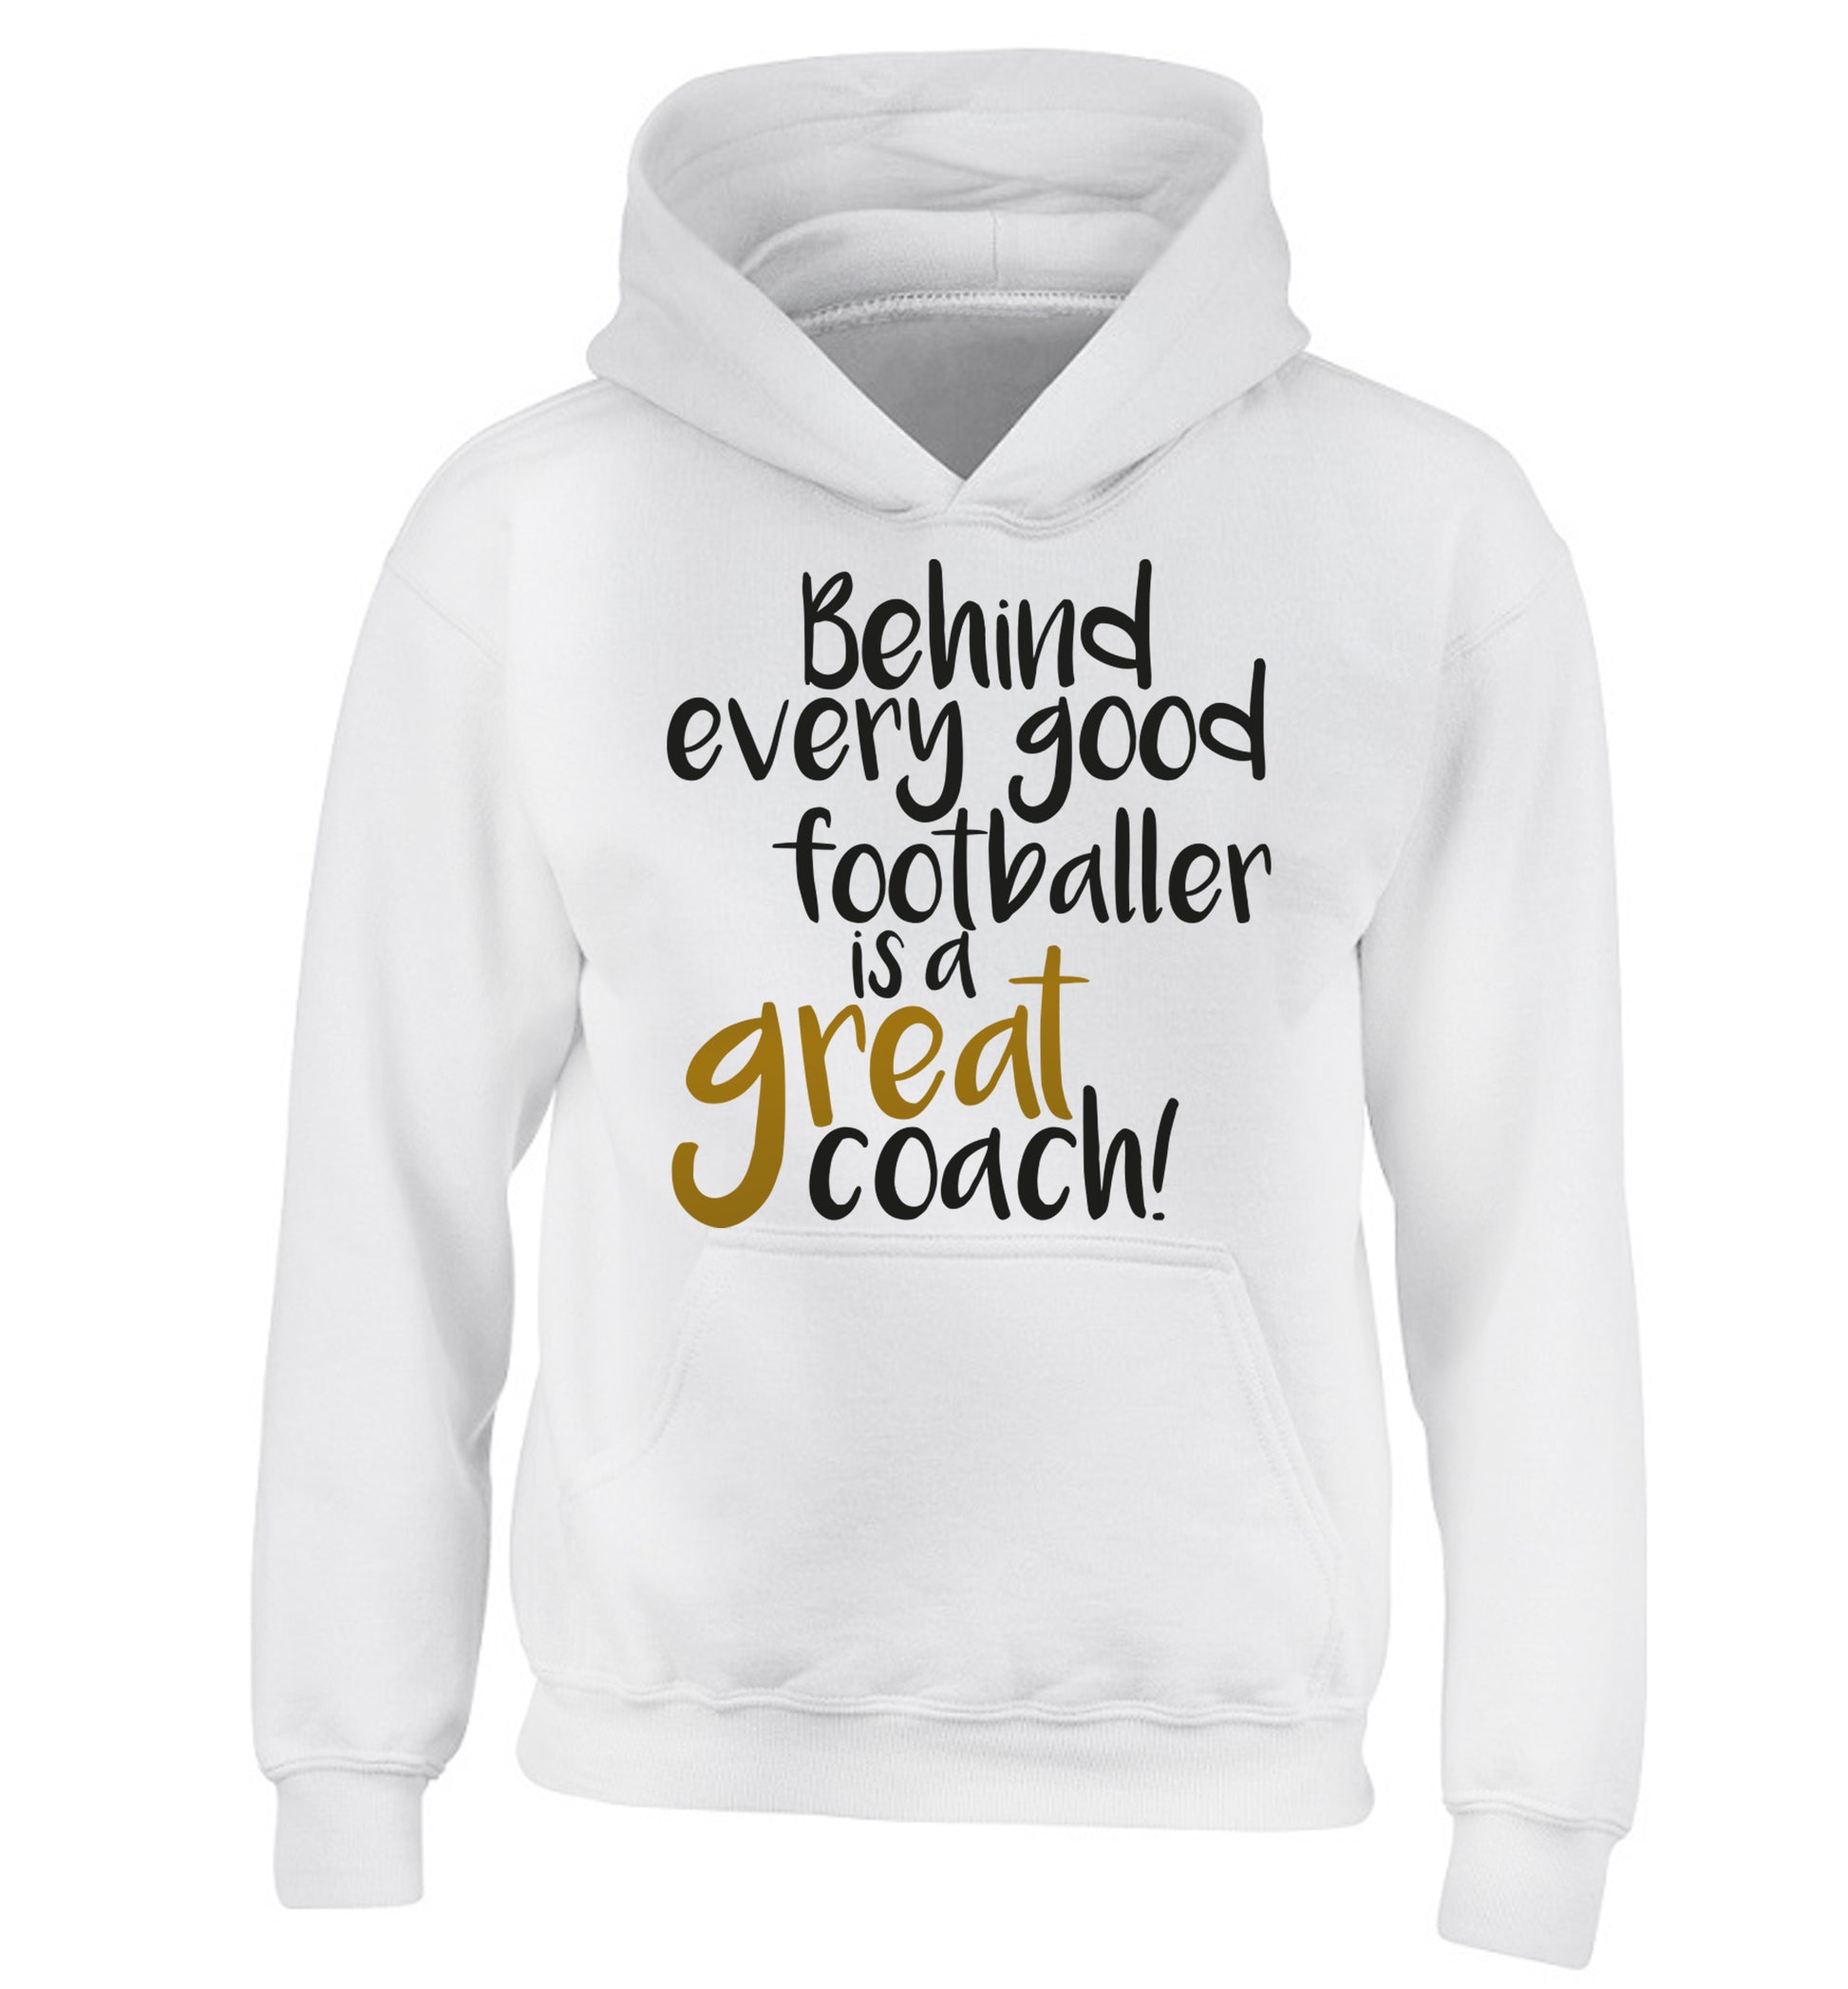 Behind every good footballer is a great coach! children's white hoodie 12-14 Years